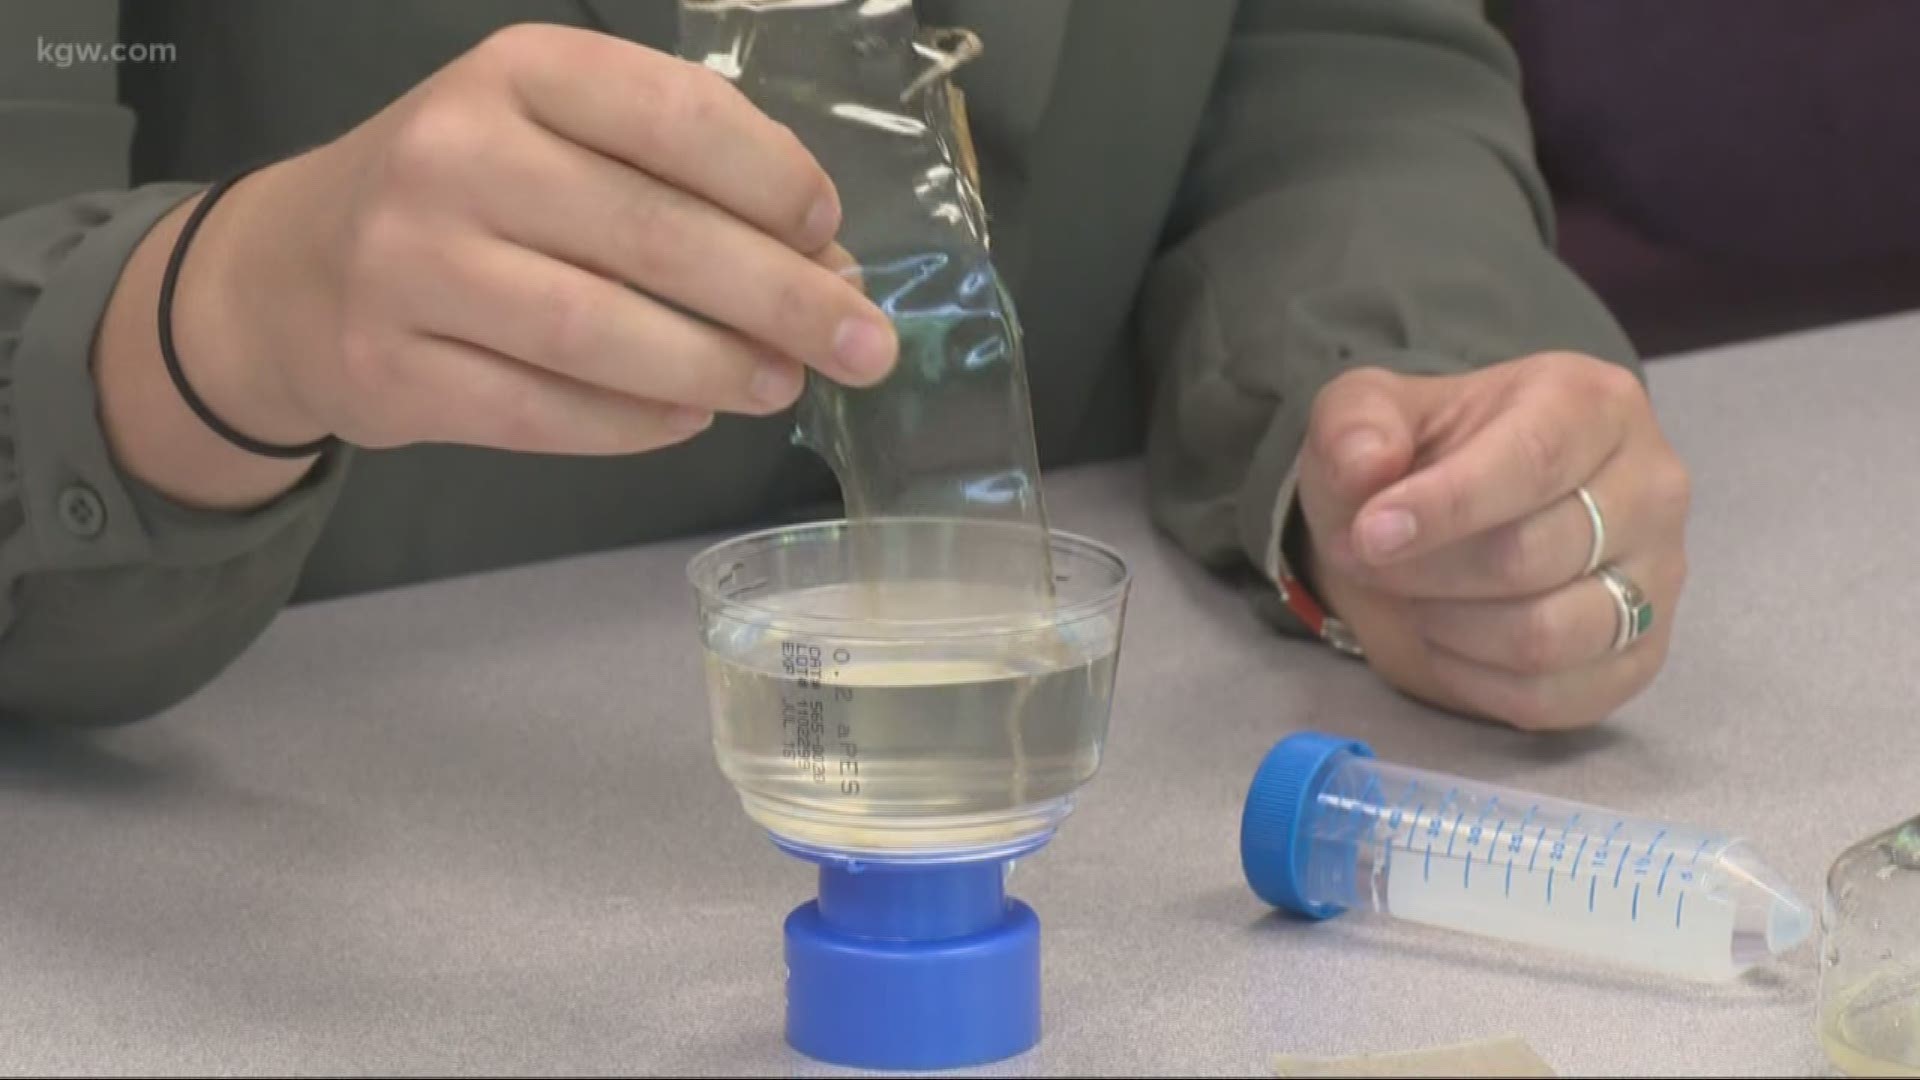 A Portland company has created an edible plastic that can dissolve in water.